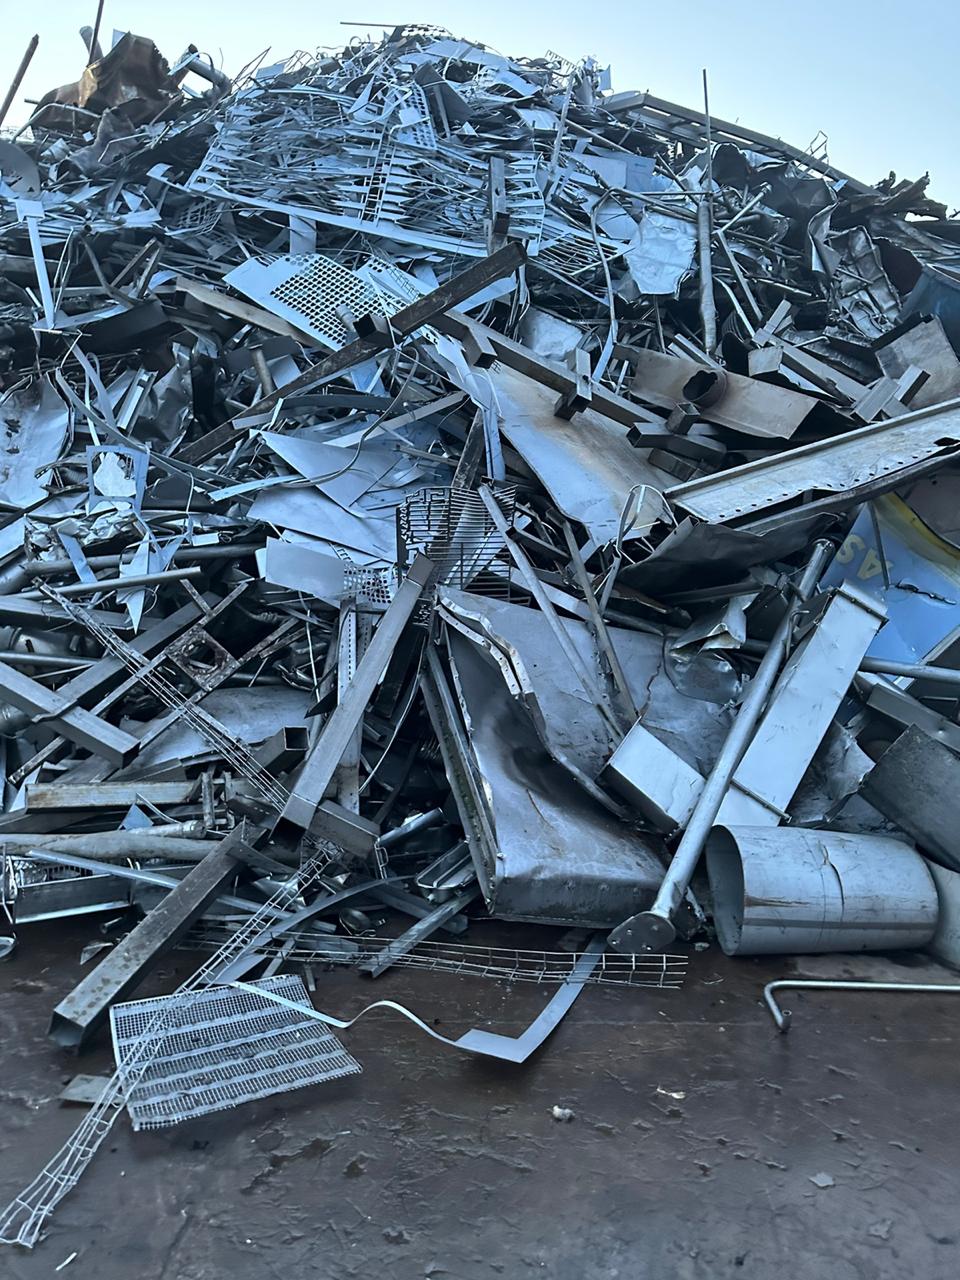 Stainless Steel Scrap Waste Solution In Iceland